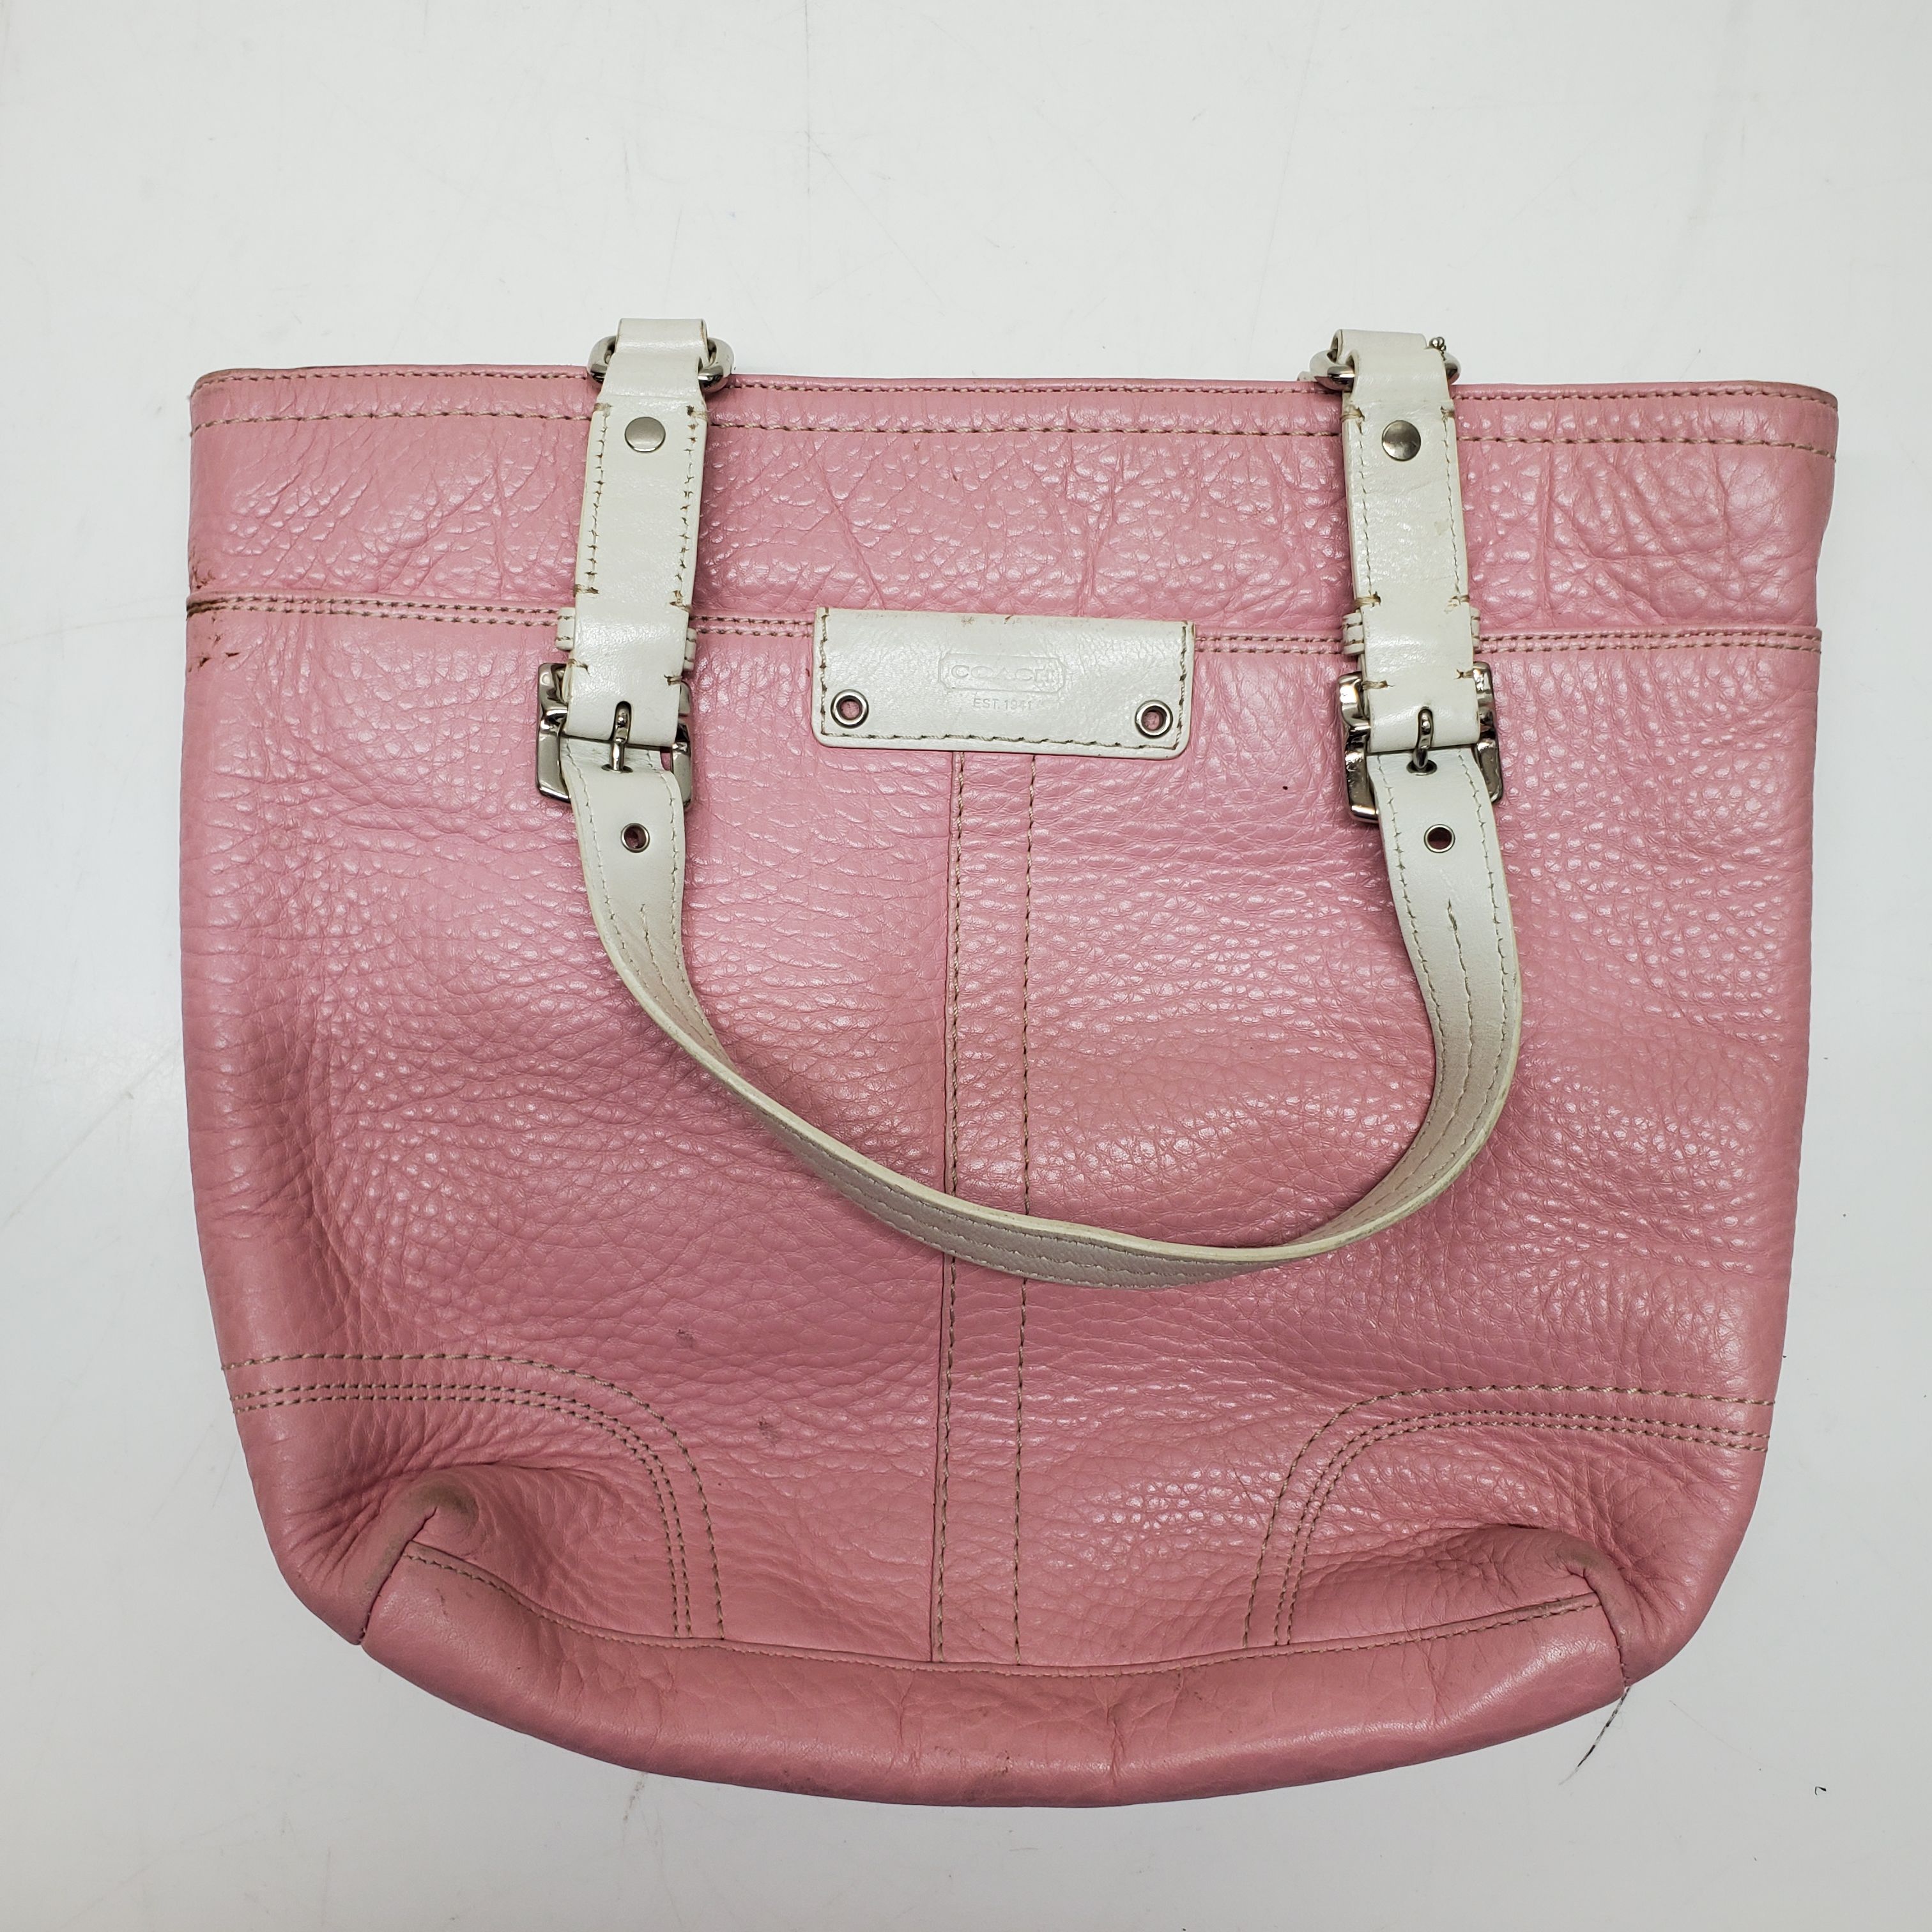 Coral Pink Leather Coach Tote Bag - Gem